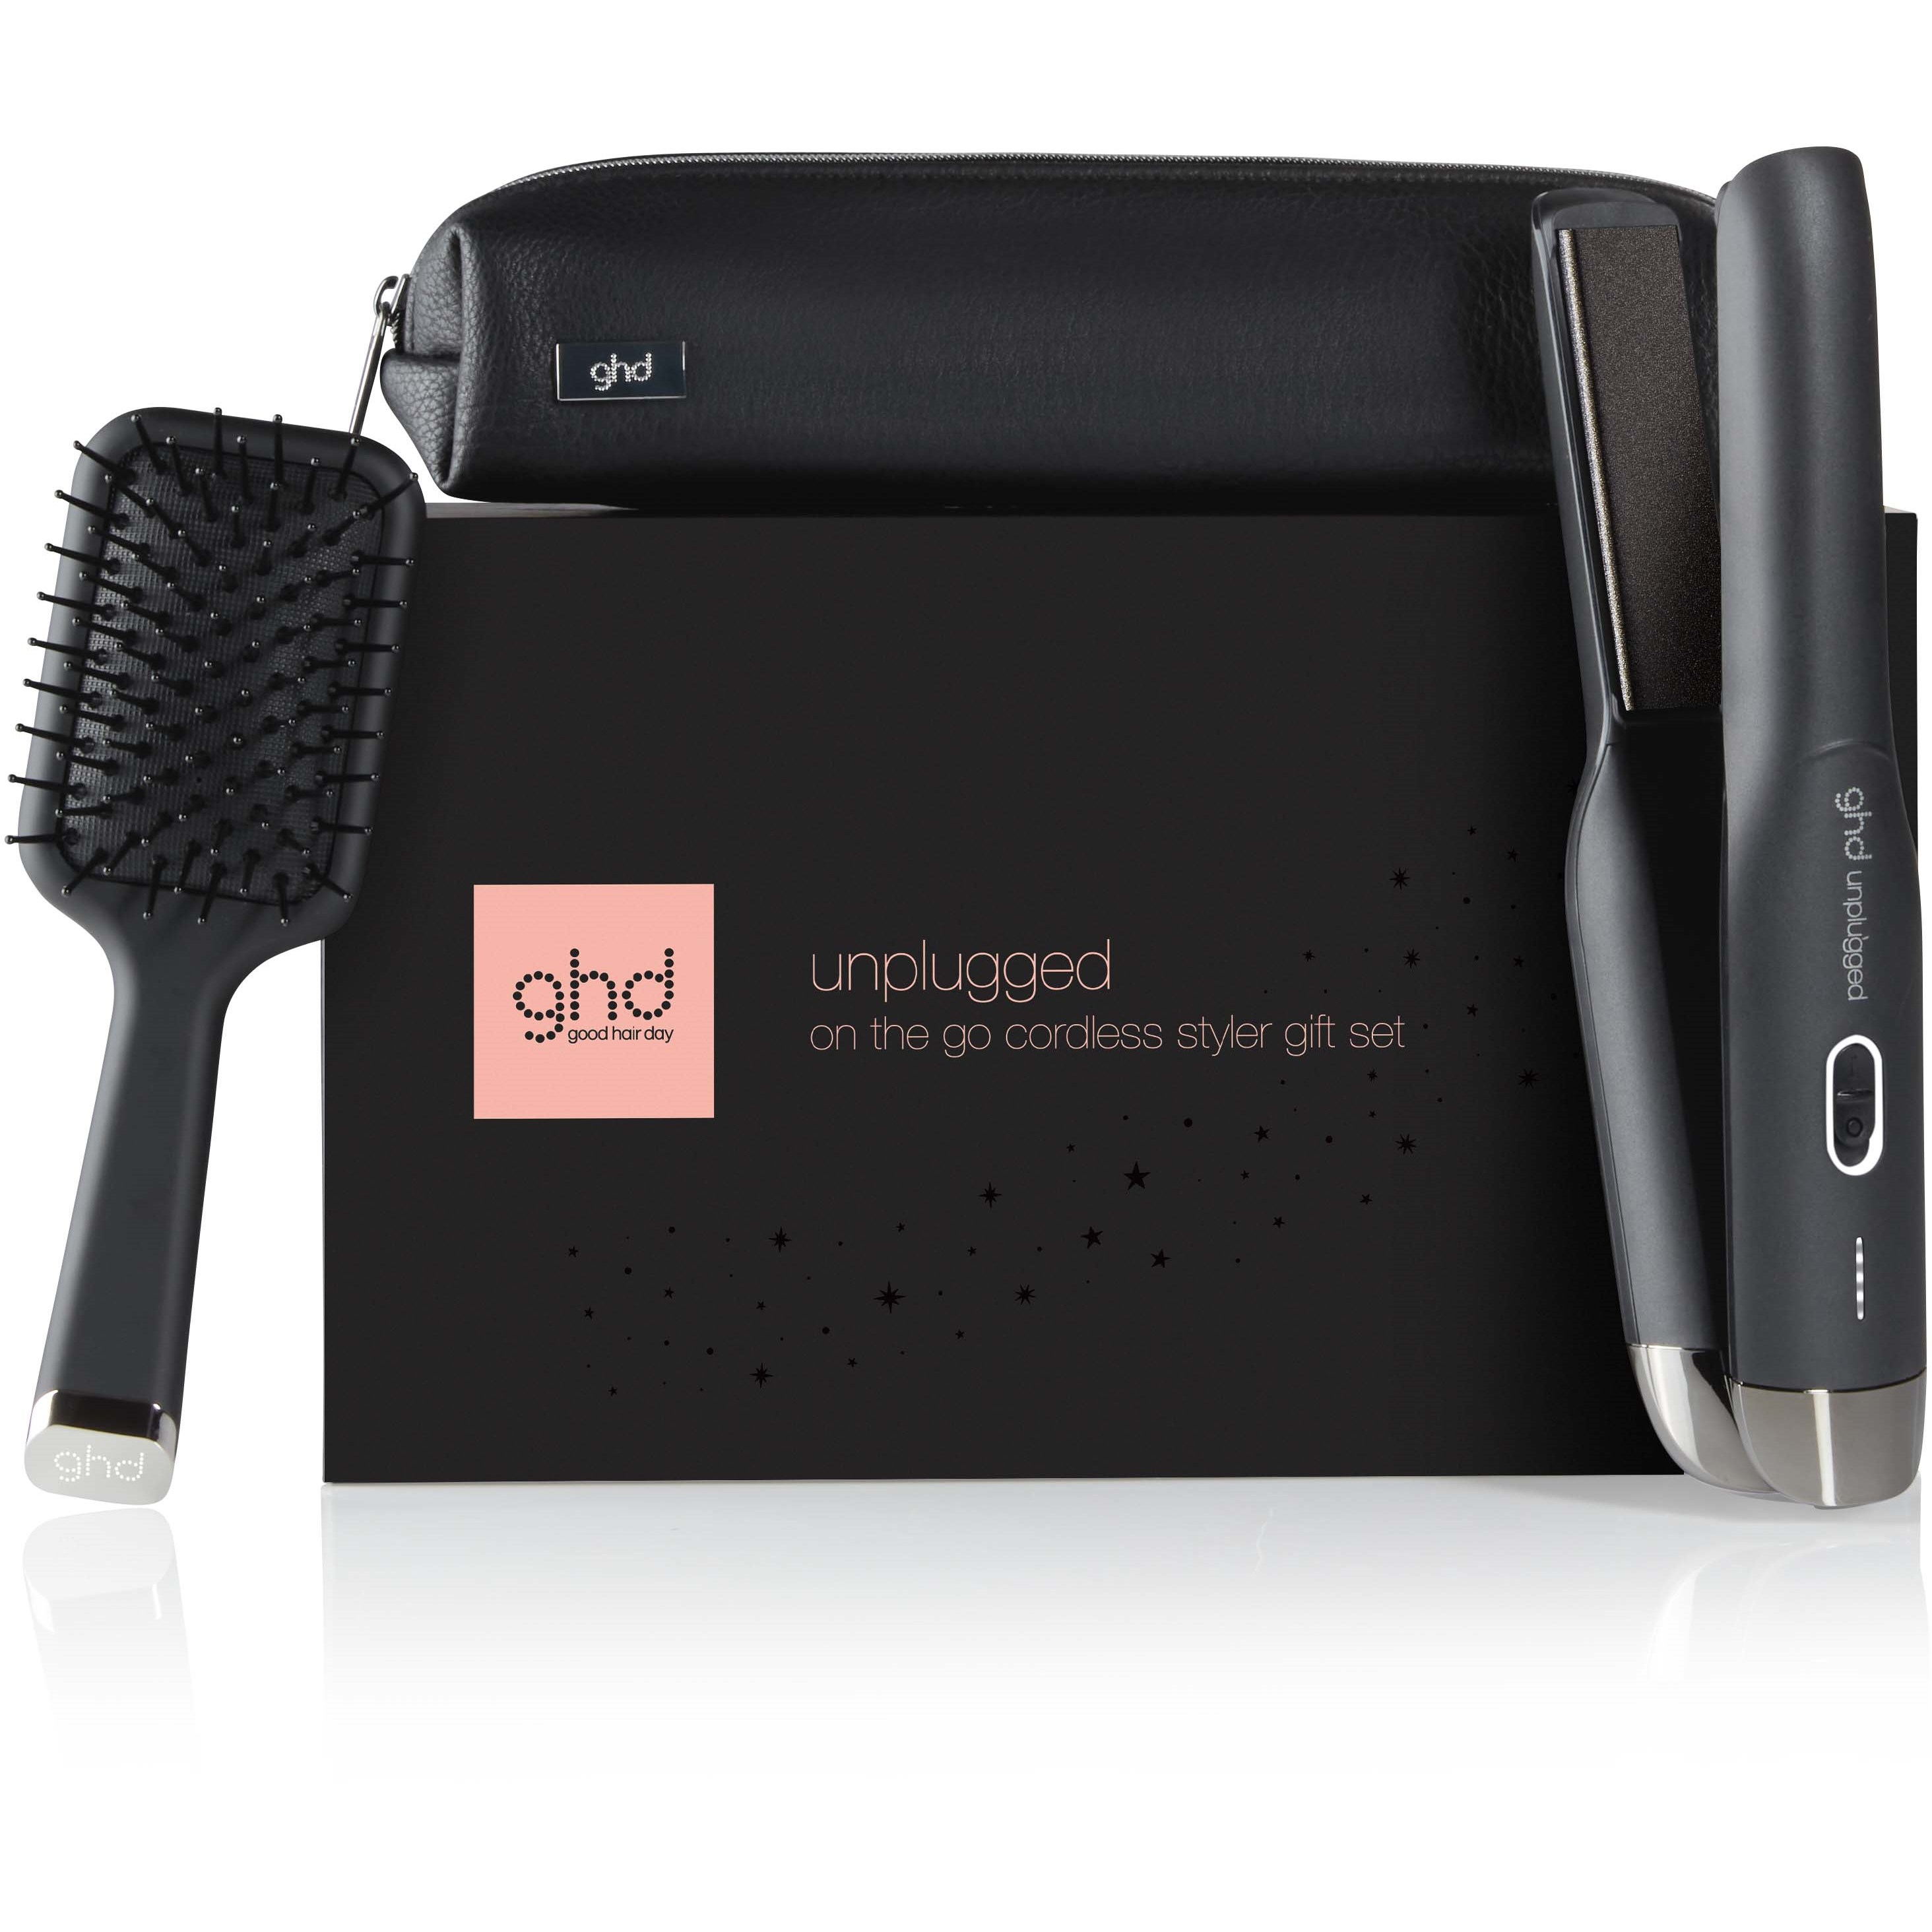 Läs mer om ghd Unplugged Dreamland Holiday Collection Gift Set